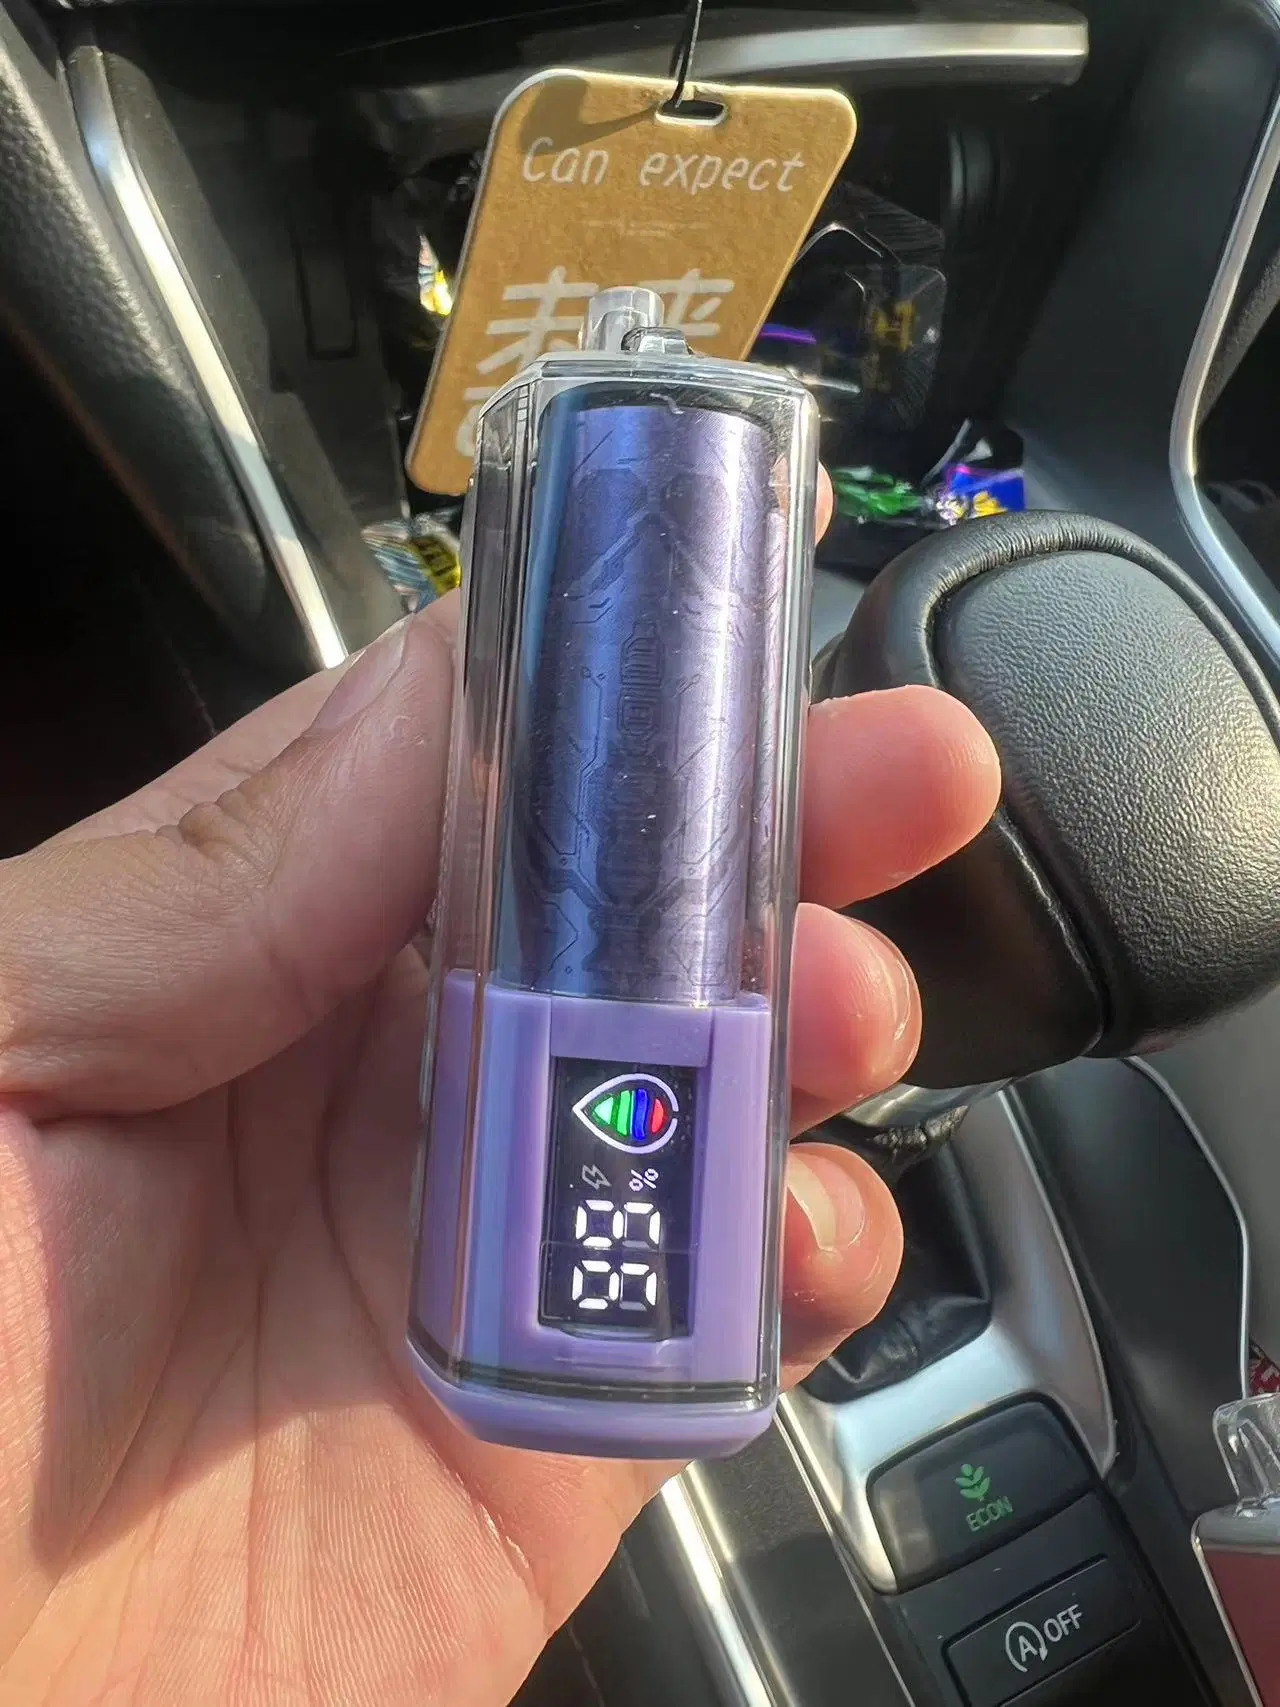 New Released Authentic Fumot Digital 12000 Vaporizer Design Waka 10000 Puffs Wholesale/Supplier I Vape Bc Drag Bar 5000 Disposable/Chargeable Pod Randm Bang 12000